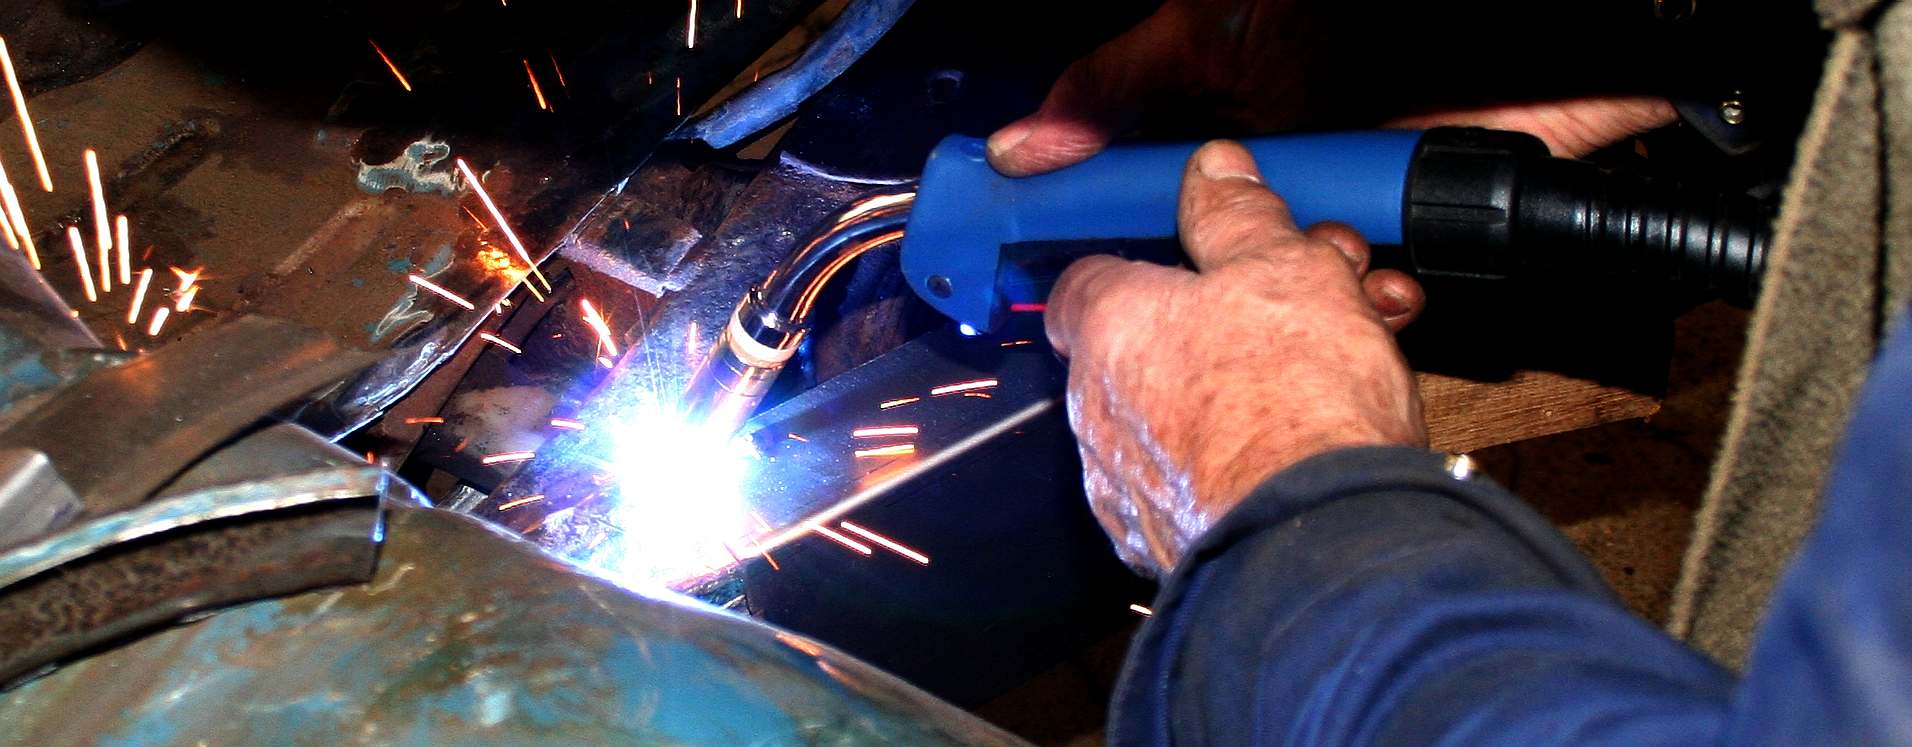 Welding in a steel chassis member for a good repair